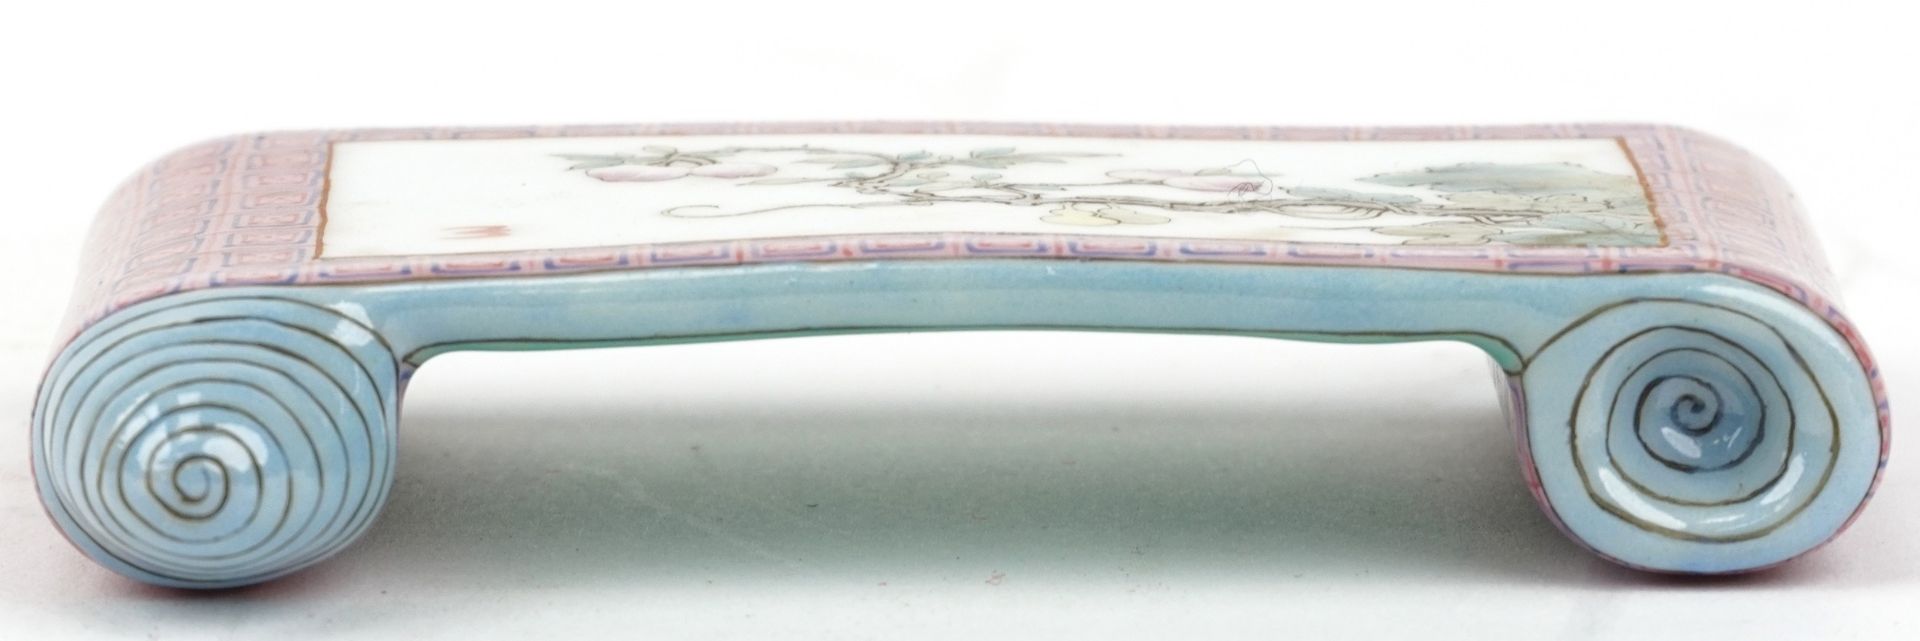 Chinese porcelain scholar's wrist rest in the form of a scroll hand painted in the famille rose - Image 3 of 9